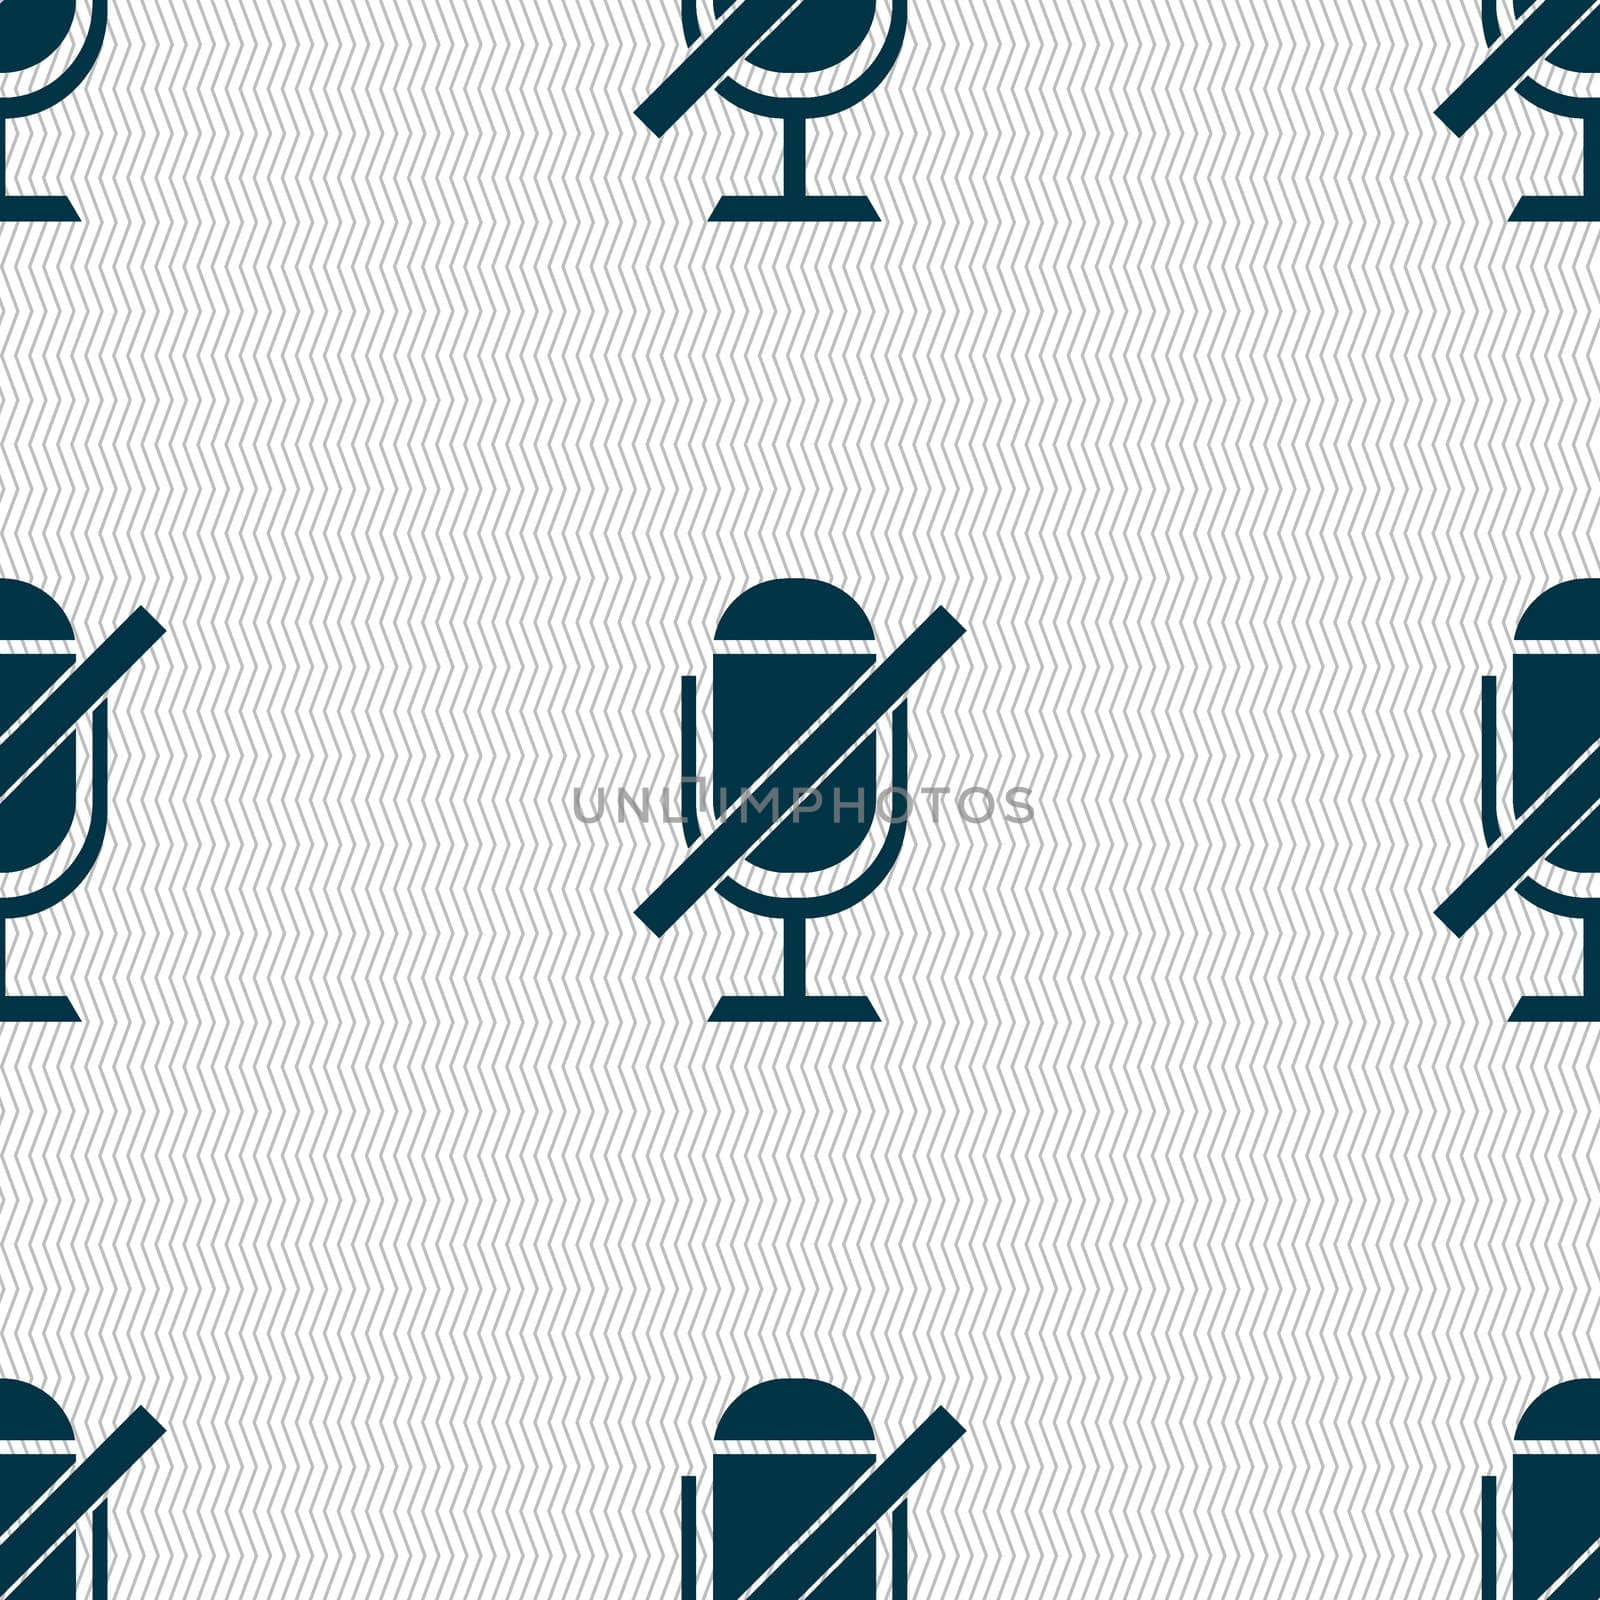 No Microphone sign icon. Speaker symbol. Seamless abstract background with geometric shapes. illustration